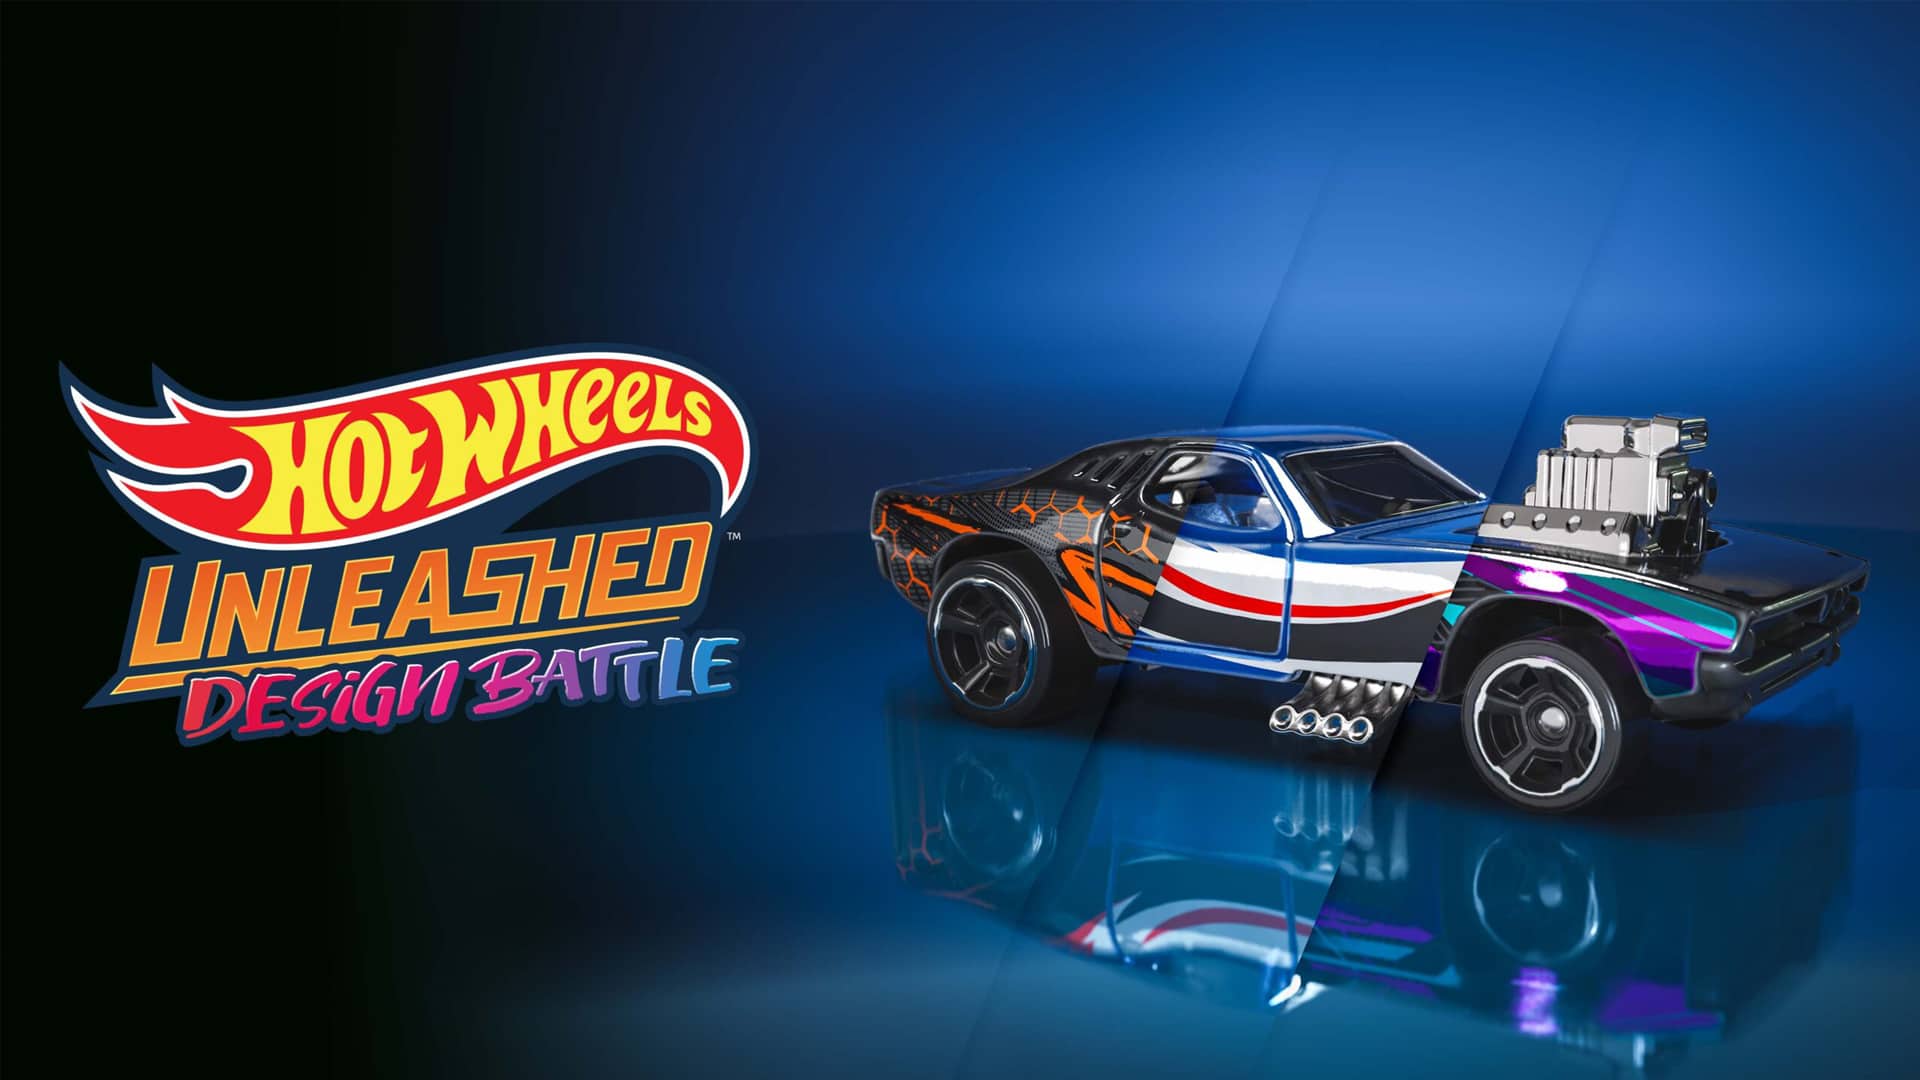 Your Hot Wheels Unleashed livery could be turned into a diecast model